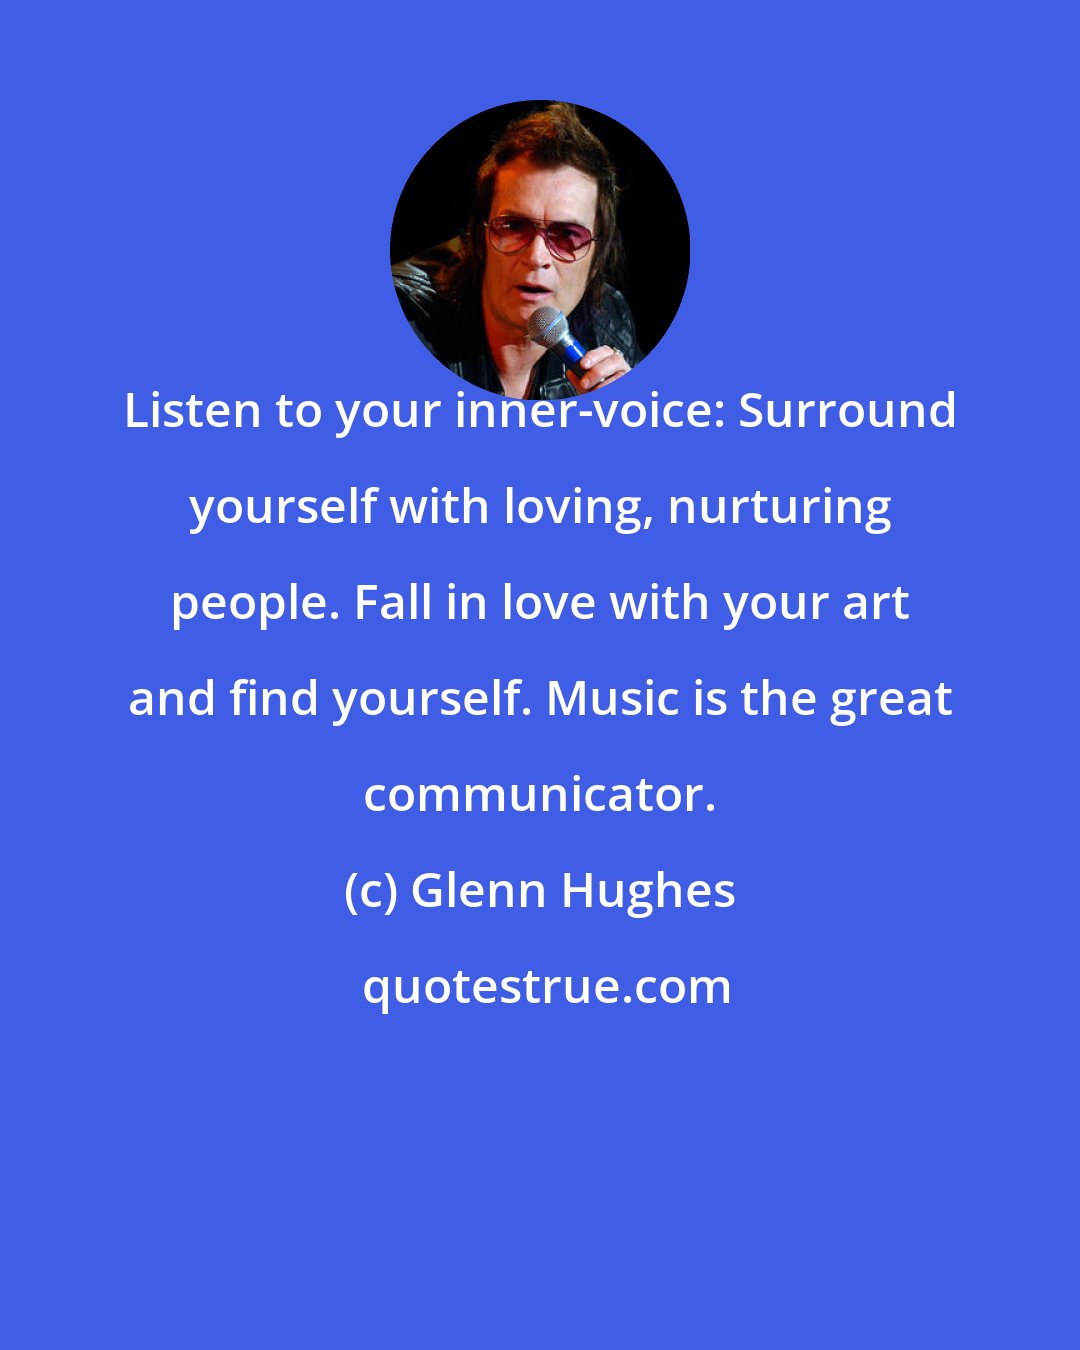 Glenn Hughes: Listen to your inner-voice: Surround yourself with loving, nurturing people. Fall in love with your art and find yourself. Music is the great communicator.